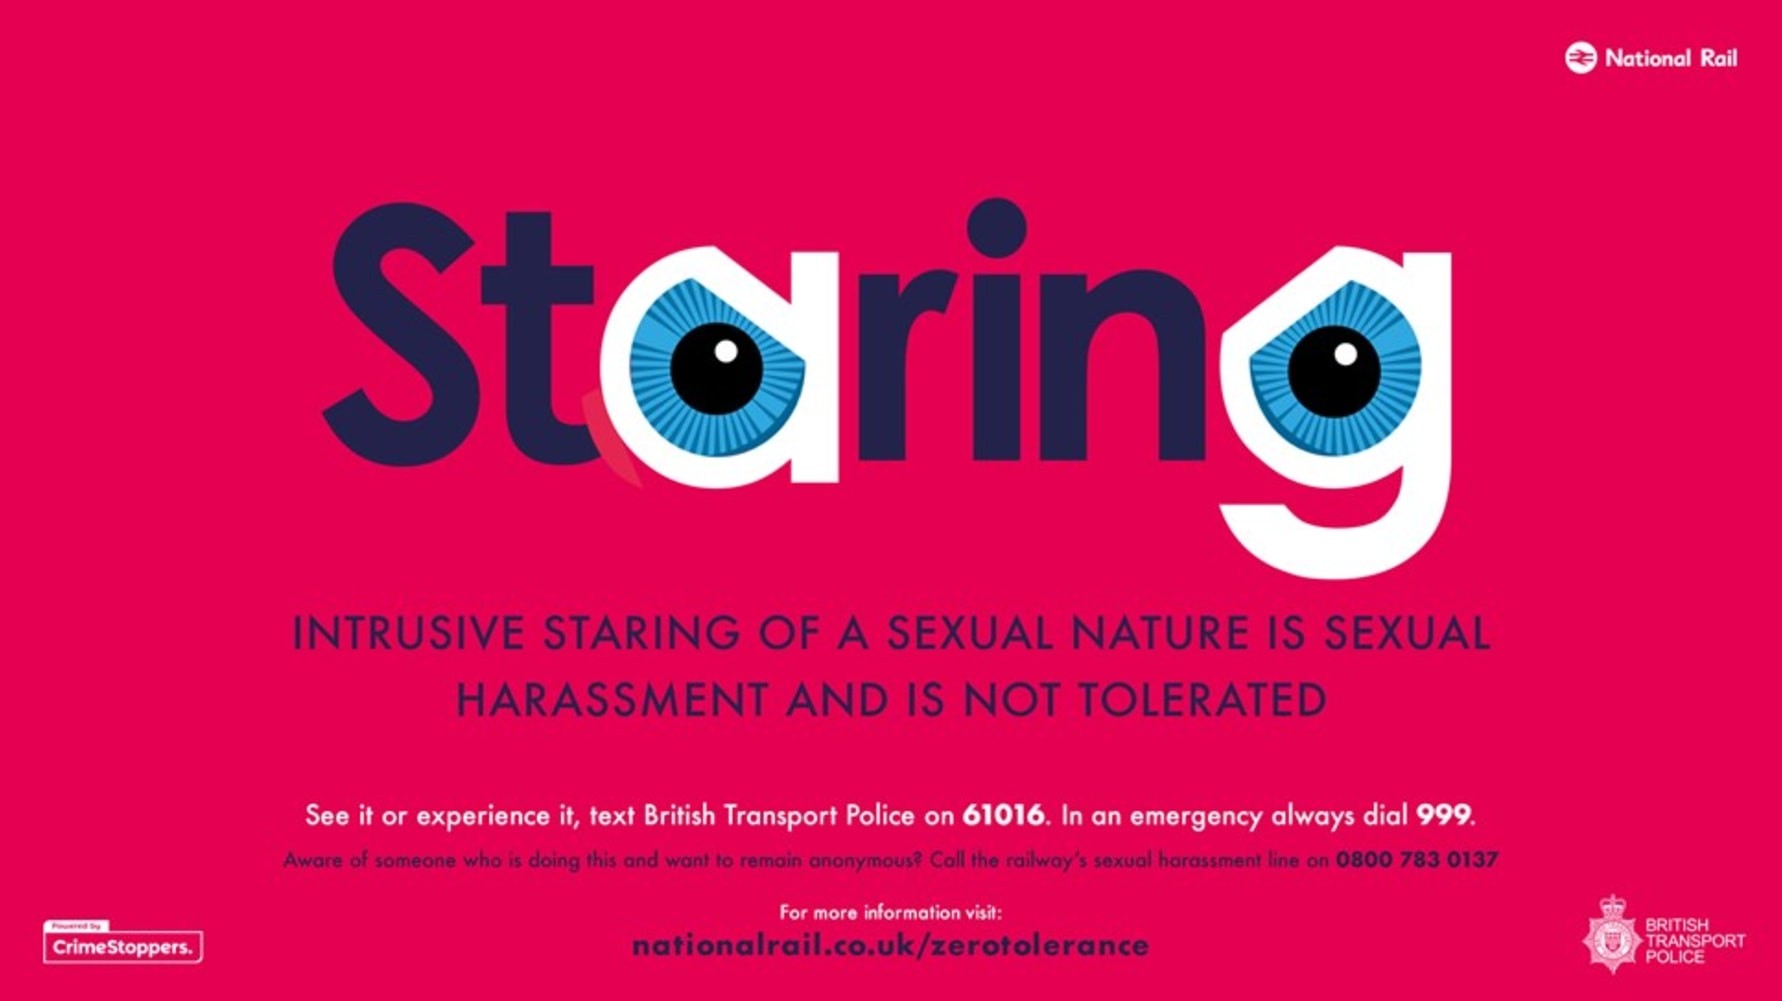 Rail industry creates immersive VR film to show passengers at Birmingham New Street how they can help to combat sexual harassment